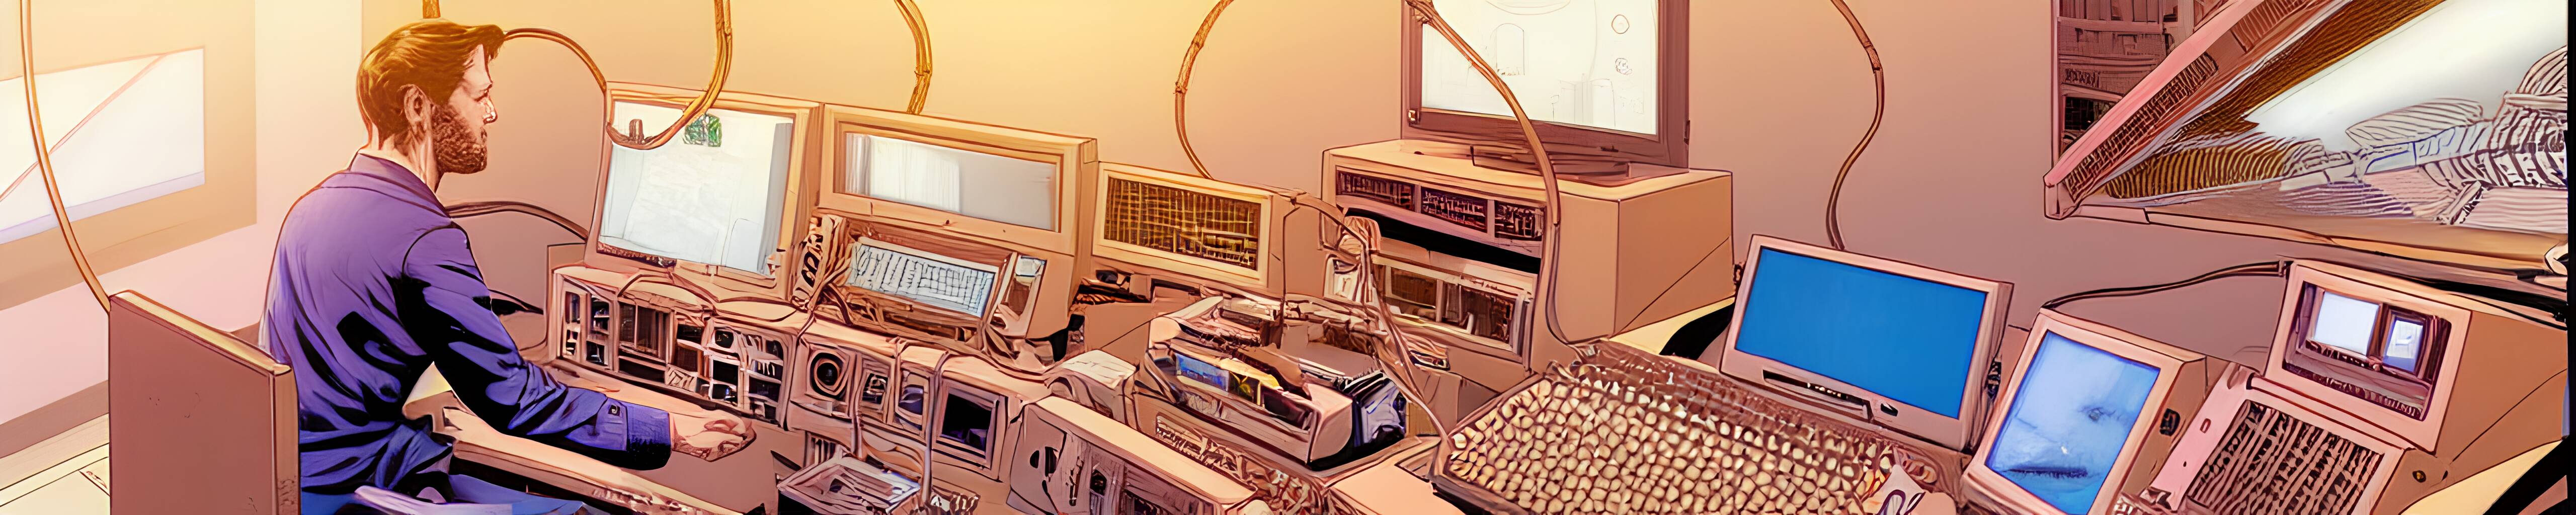 A comic book style illustration of a man sitting behind a desktop computer.